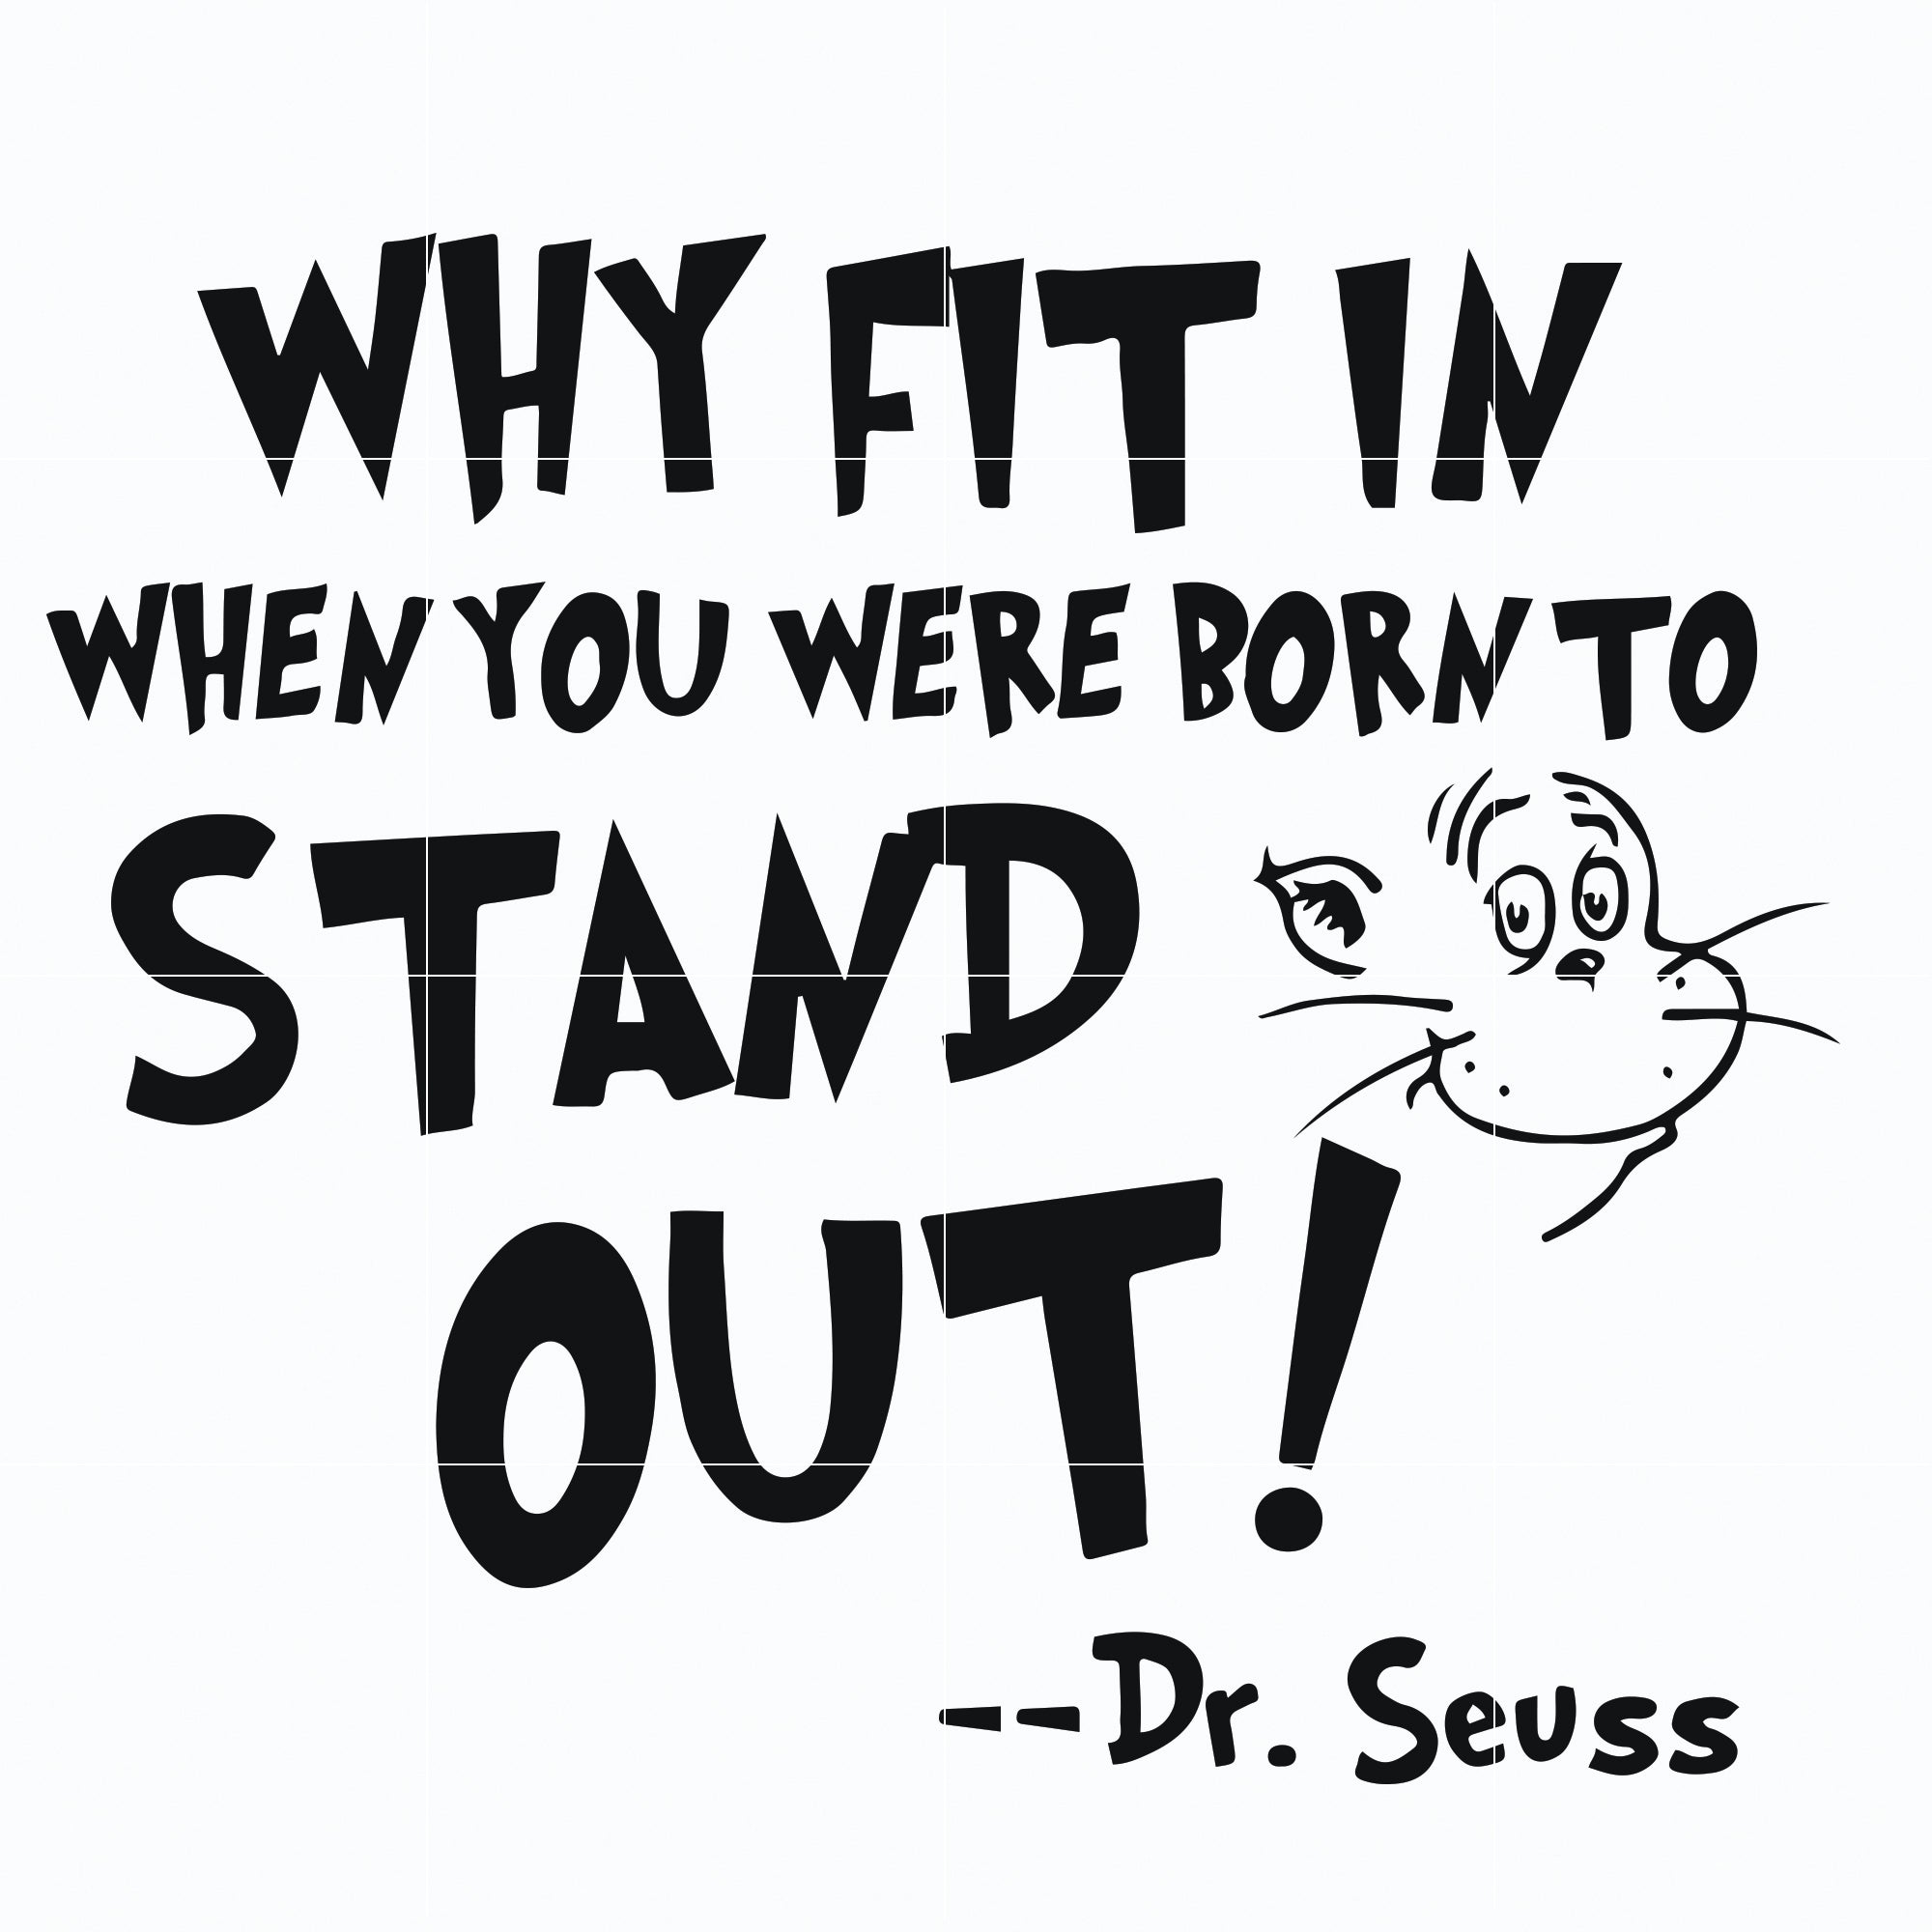 Why Fit In When You Were Born To Stand Out Png, Svg, Dxf, Eps – DreamSVG  Store